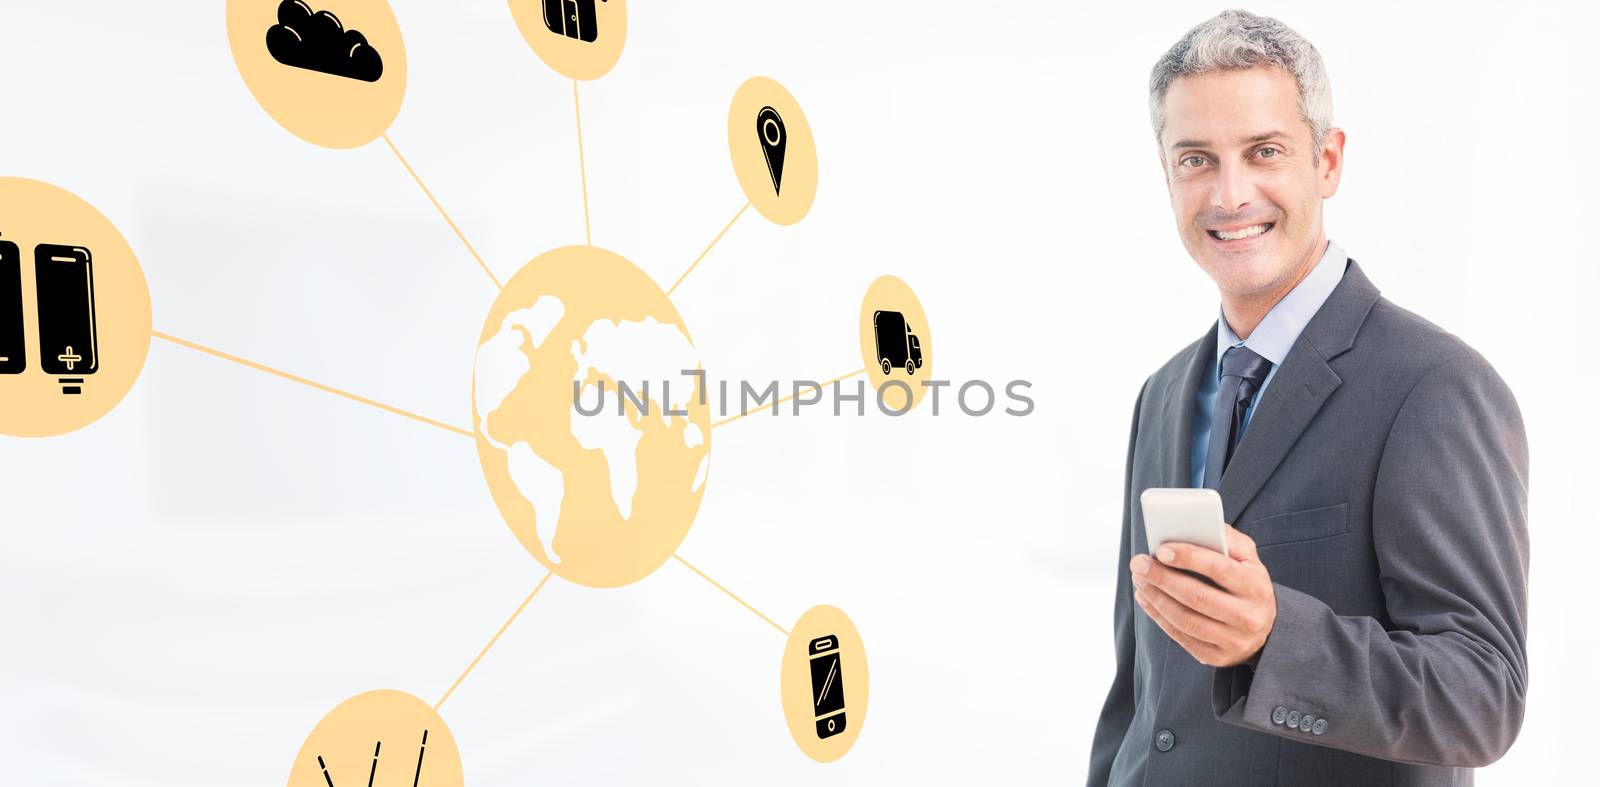 Portrait of smiling businessman holding mobile phone against modern room overlooking city